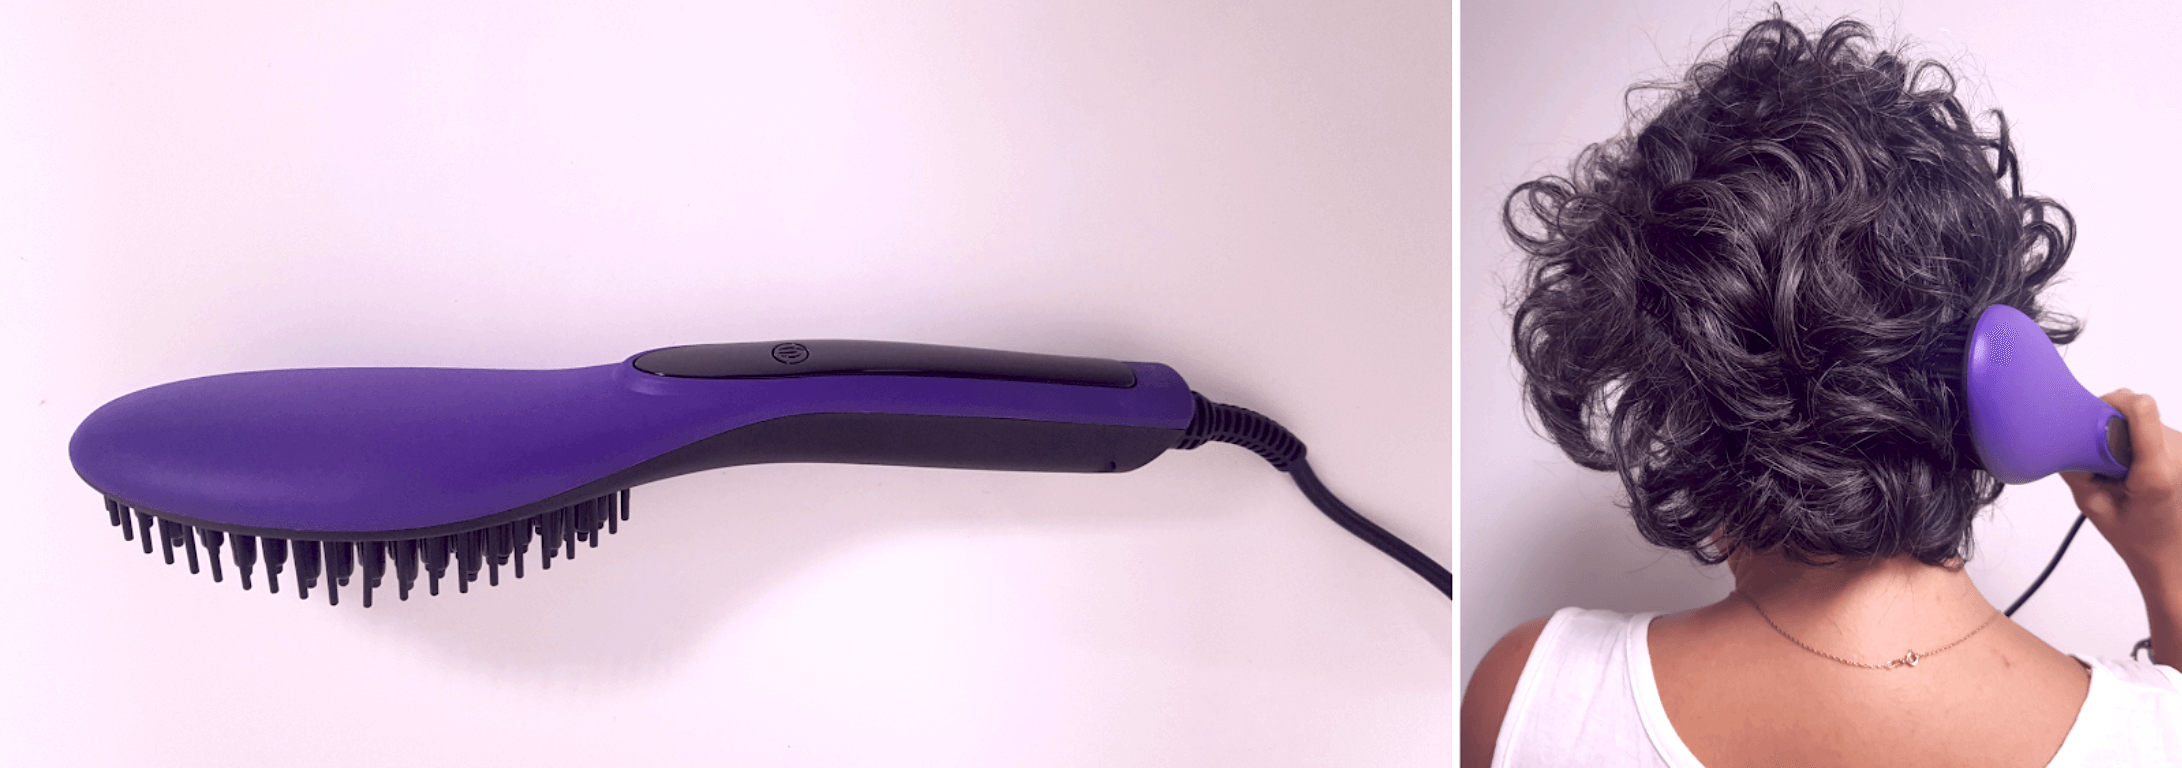 Evalectric Straight Brush Styler violet review